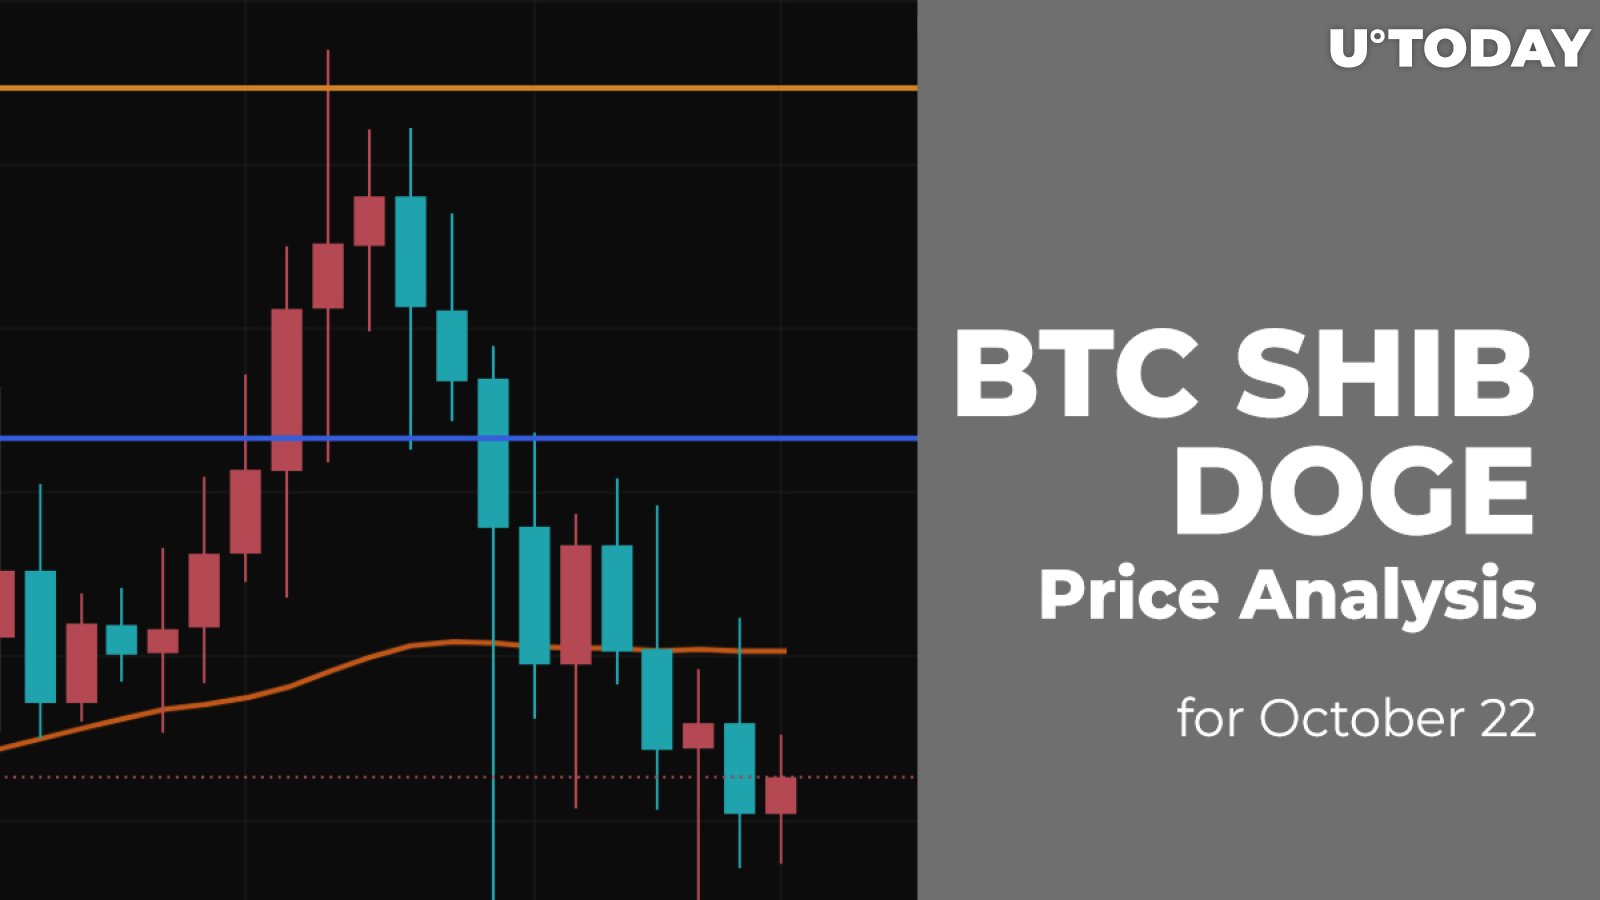 BTC, SHIB and DOGE Price Analysis for October 22